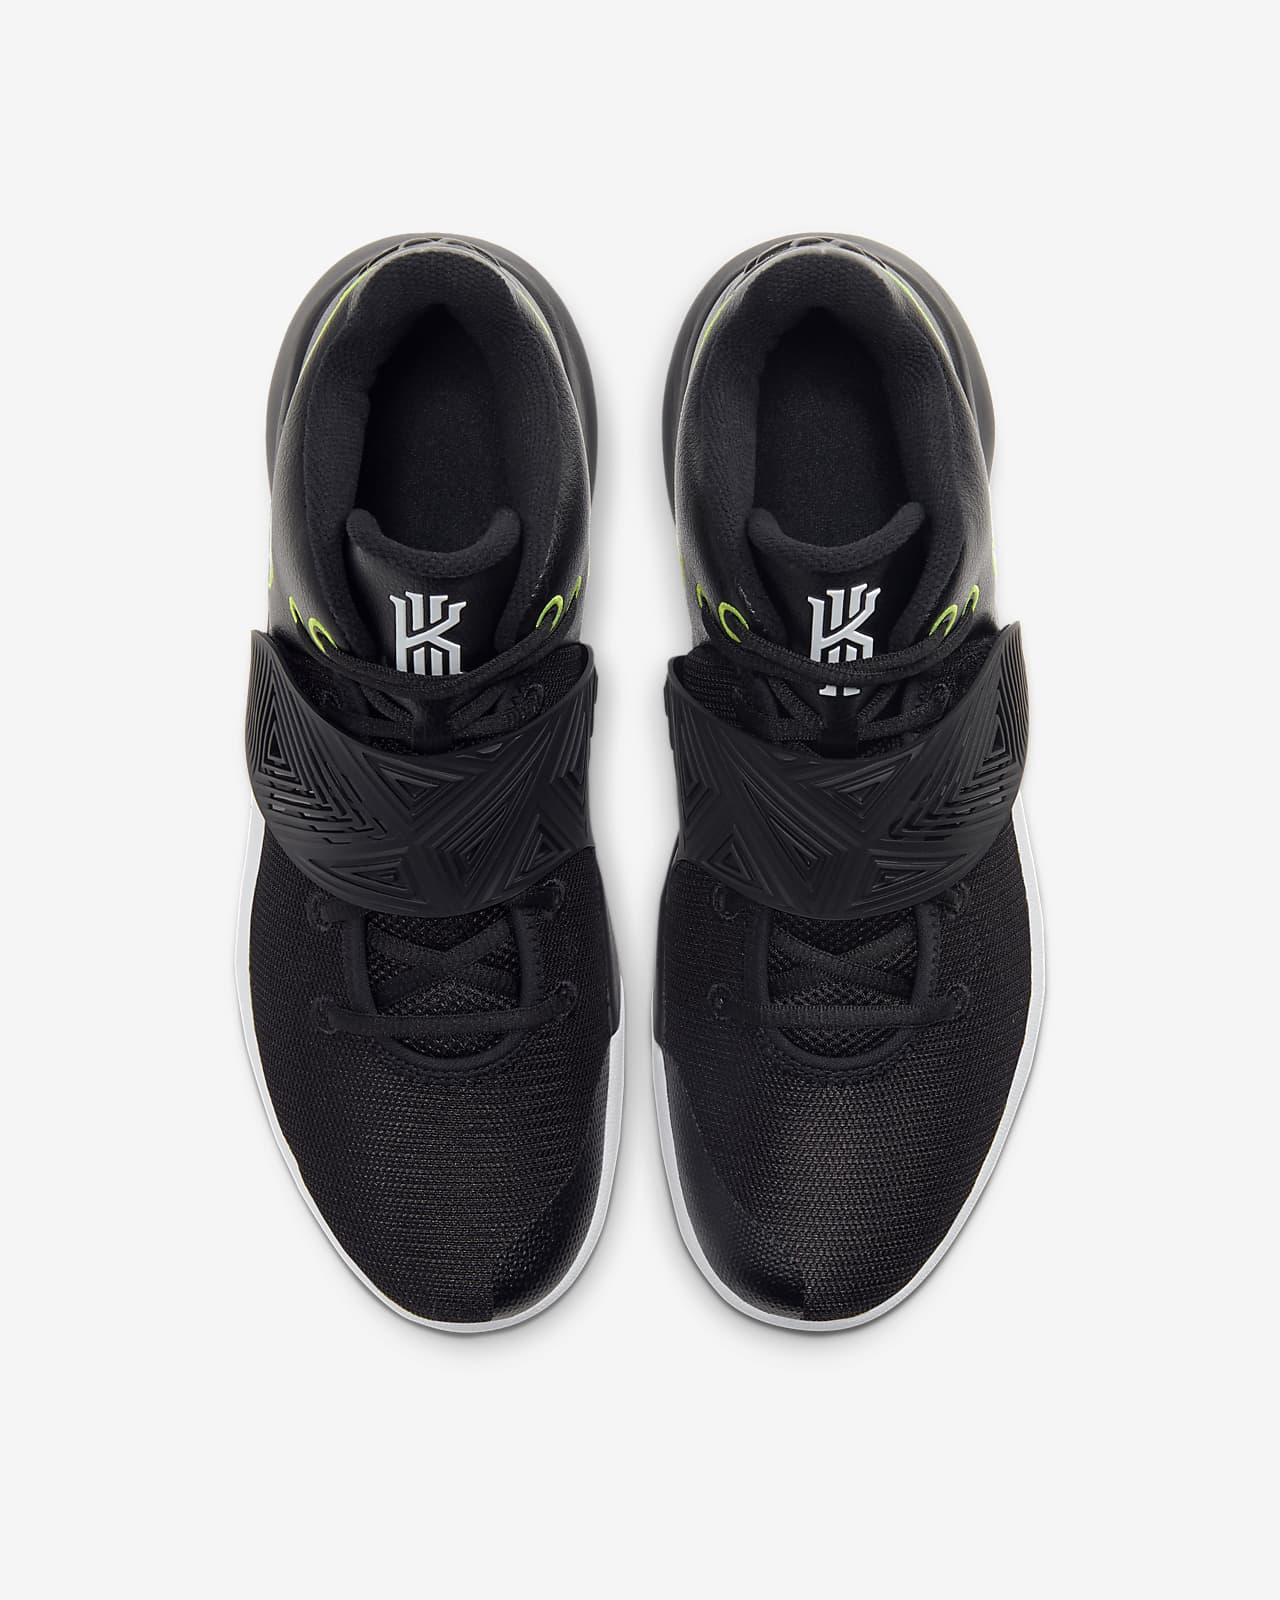 what does 11.23 mean on kyrie shoes